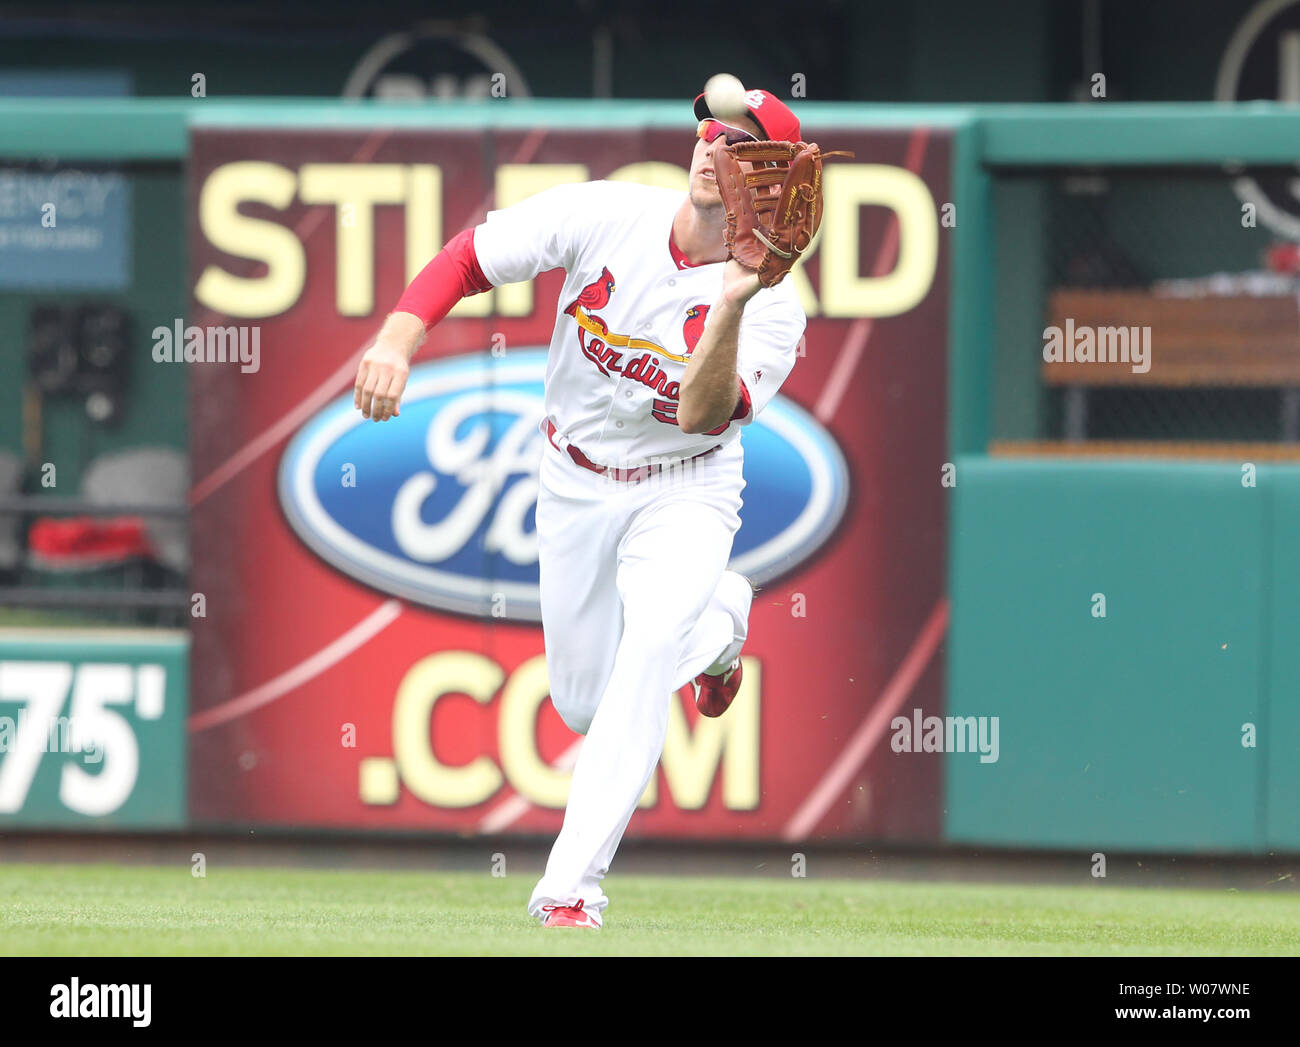 St. Louis Cardinals Stephen Piscotty makes a play for the out on a fly ball off the bat of Chicago Cubs Addison Russell in the sixth inning at Busch Stadium in St. Louis on September 14, 2016.  Chicago won the game 7-0. Photo by Bill Greenblatt/UPI Stock Photo